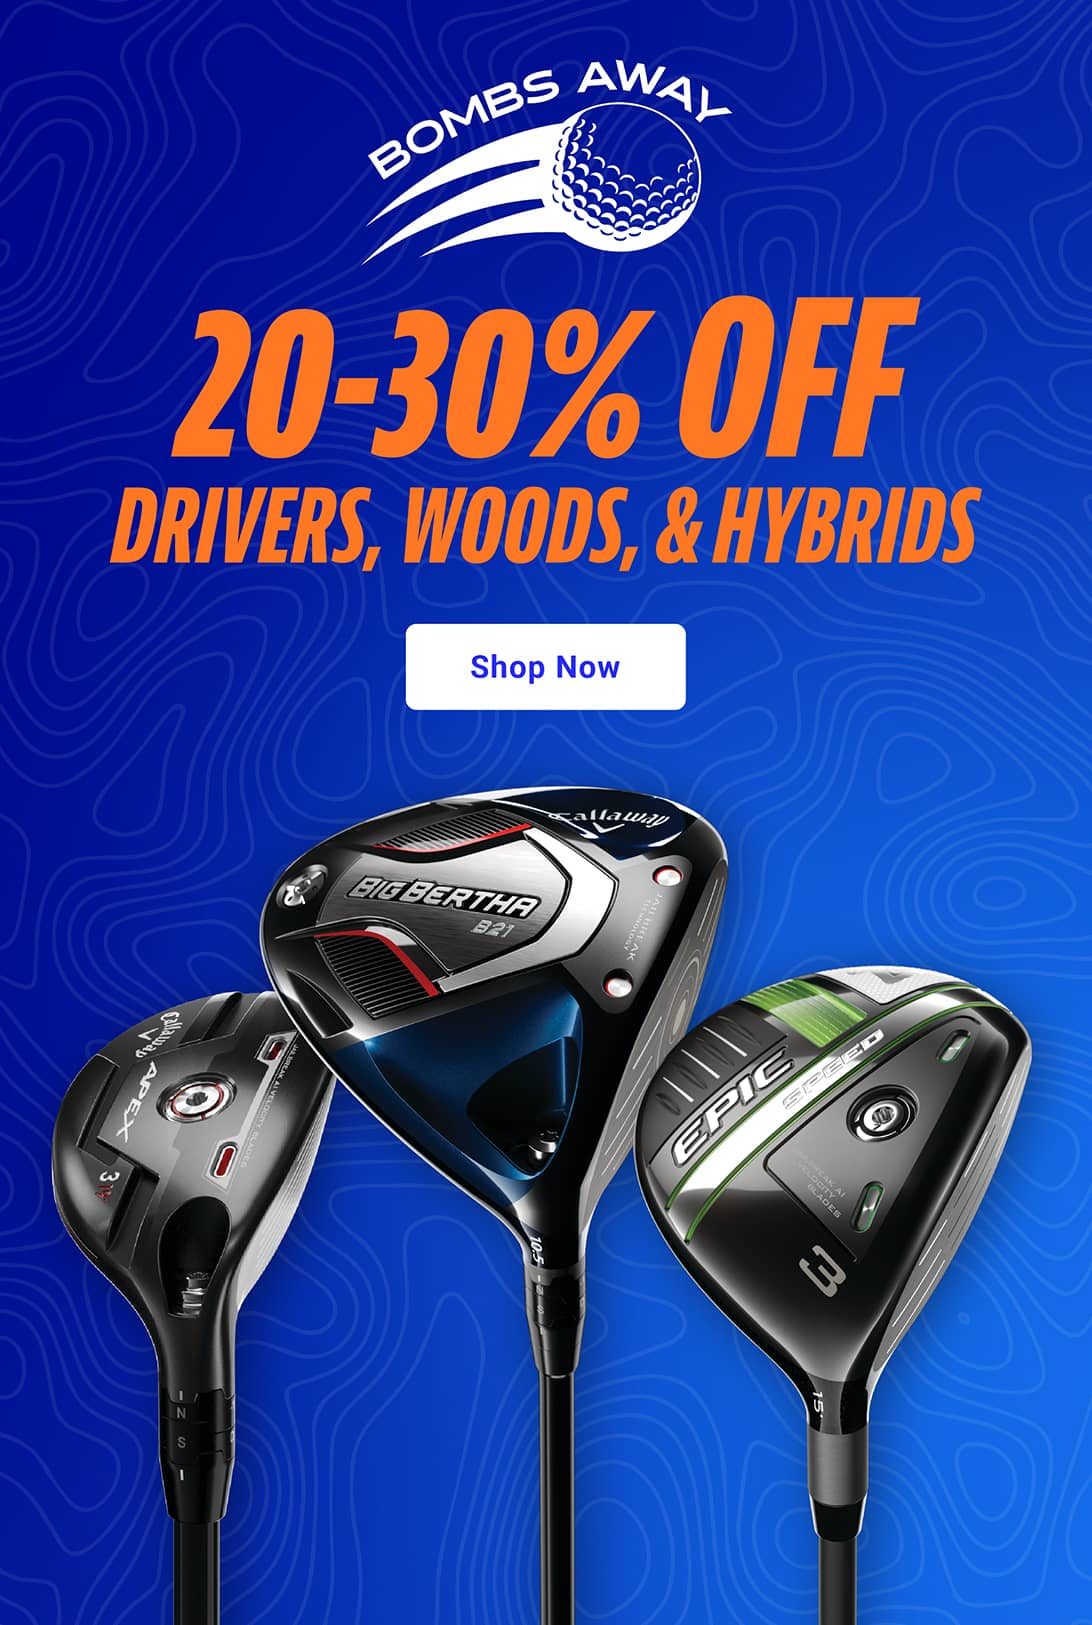 bombs away! twenty to thirty percent off drivers, woods, and hybrids - shop drivers